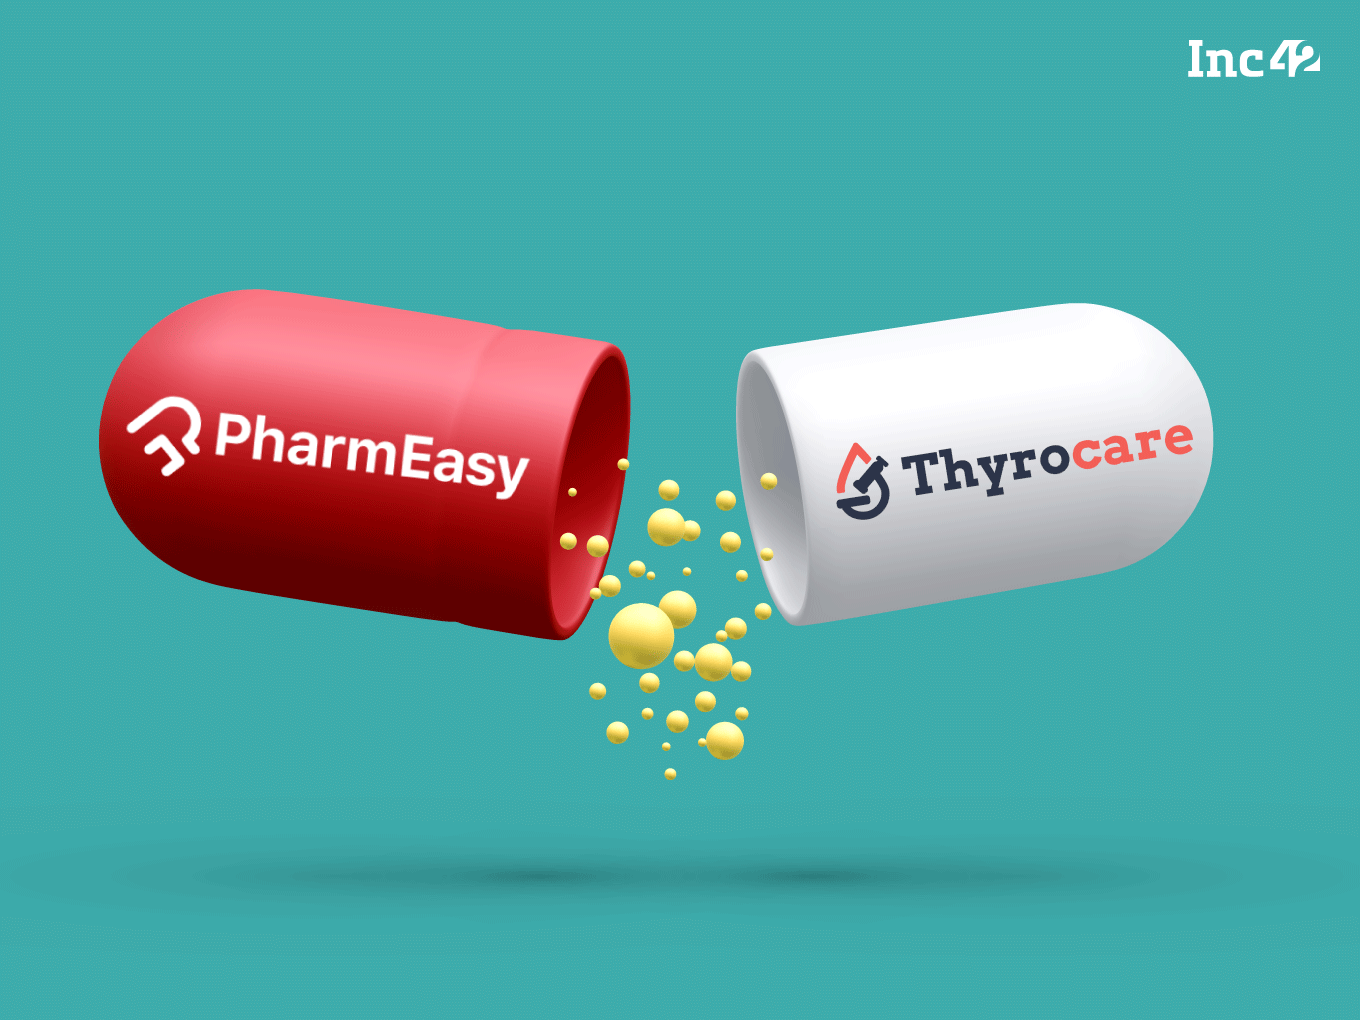 Is PharmEasy’s Debt-Laden Bubble About To Burst?